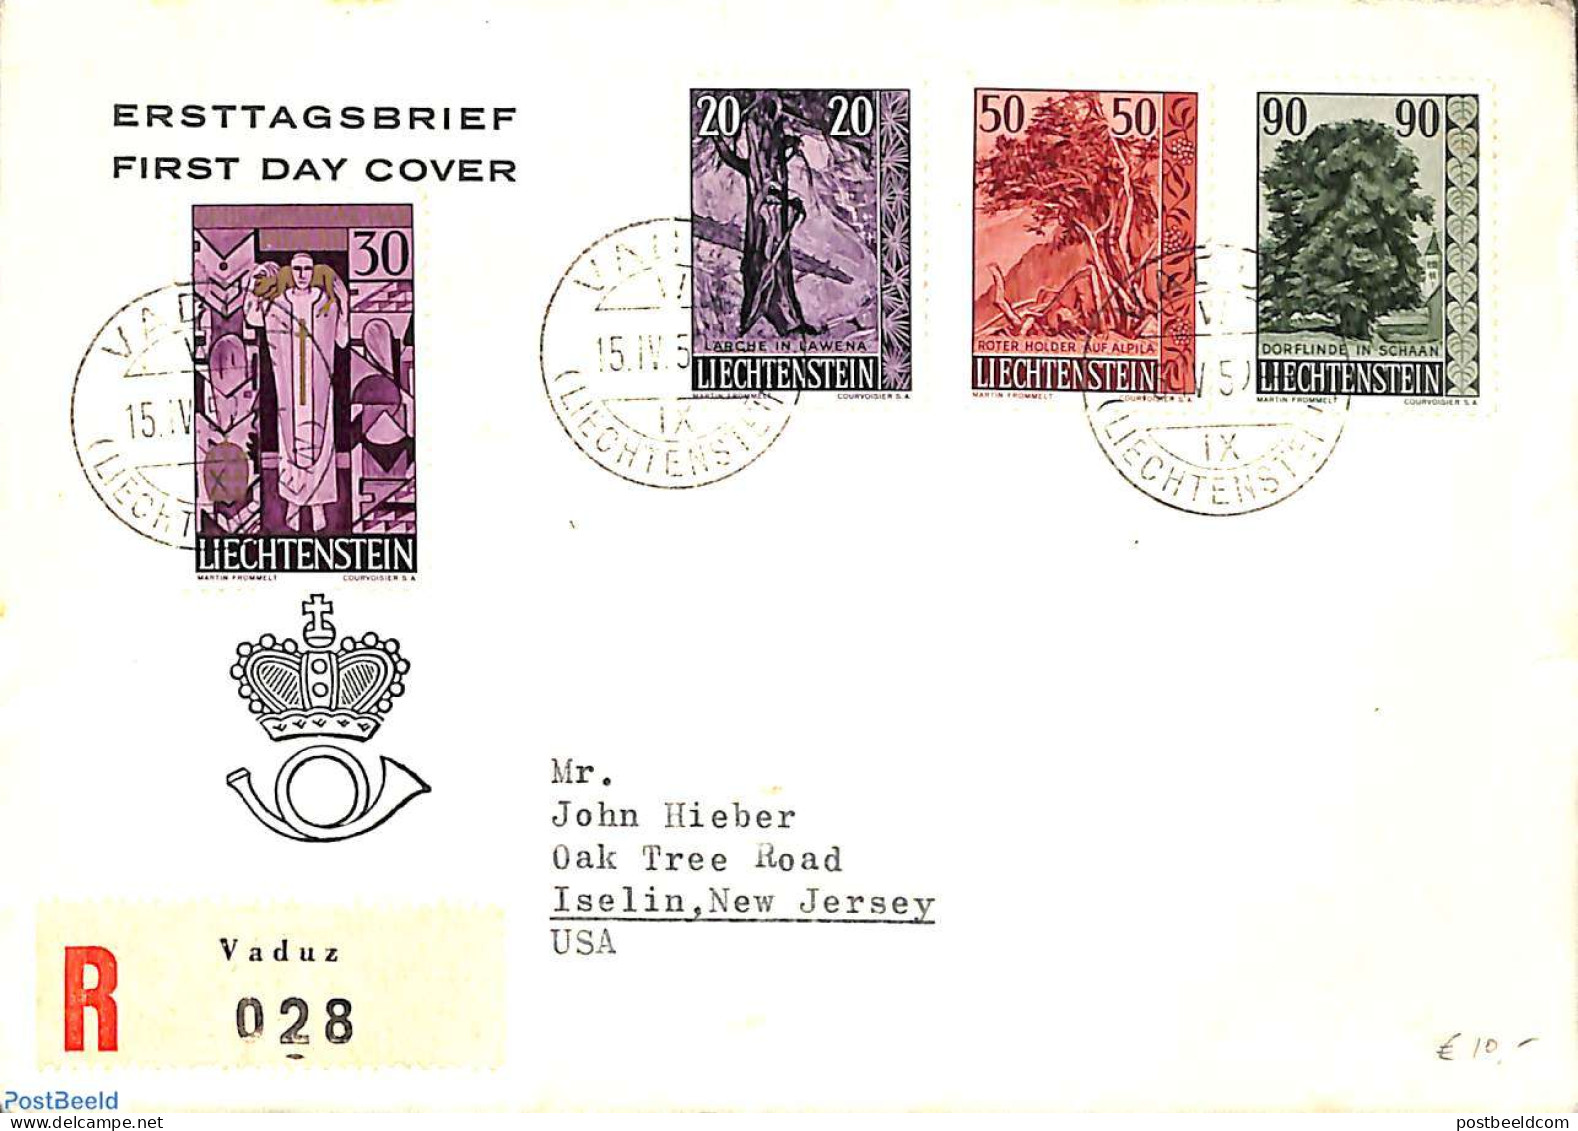 Liechtenstein 1959 Trees 3v, FDC, First Day Cover, Nature - Trees & Forests - Briefe U. Dokumente